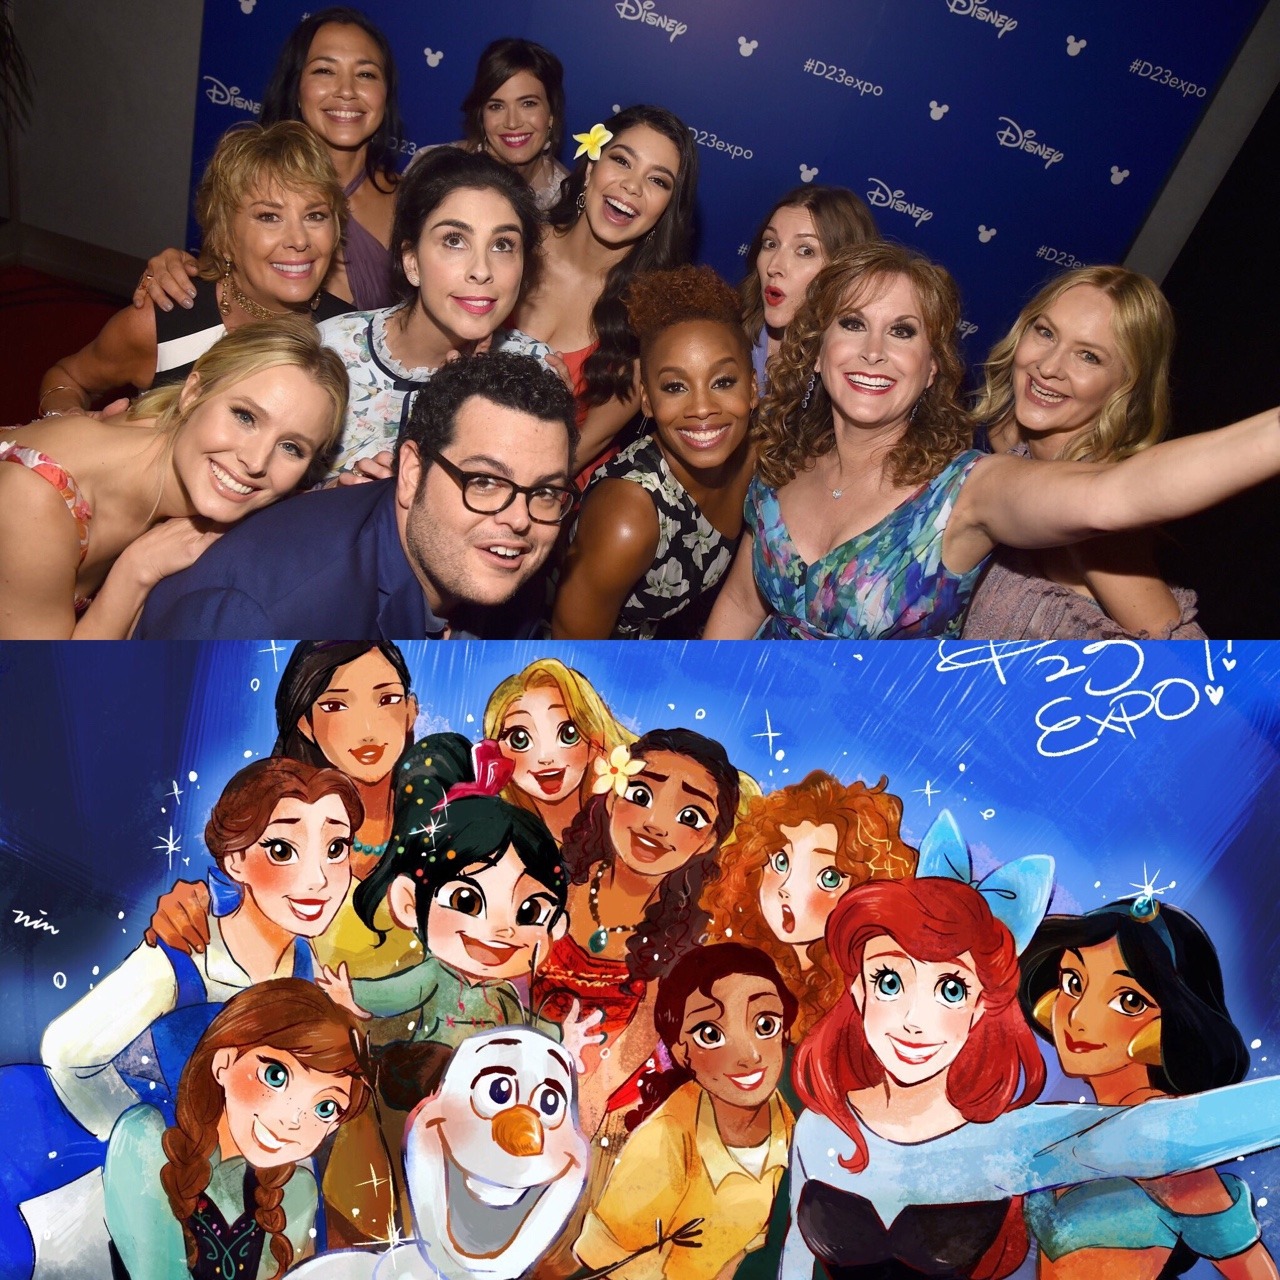 klubbhead:   yessirwhatever:   oh-that-disney-princess-emily:  Someone did the thing